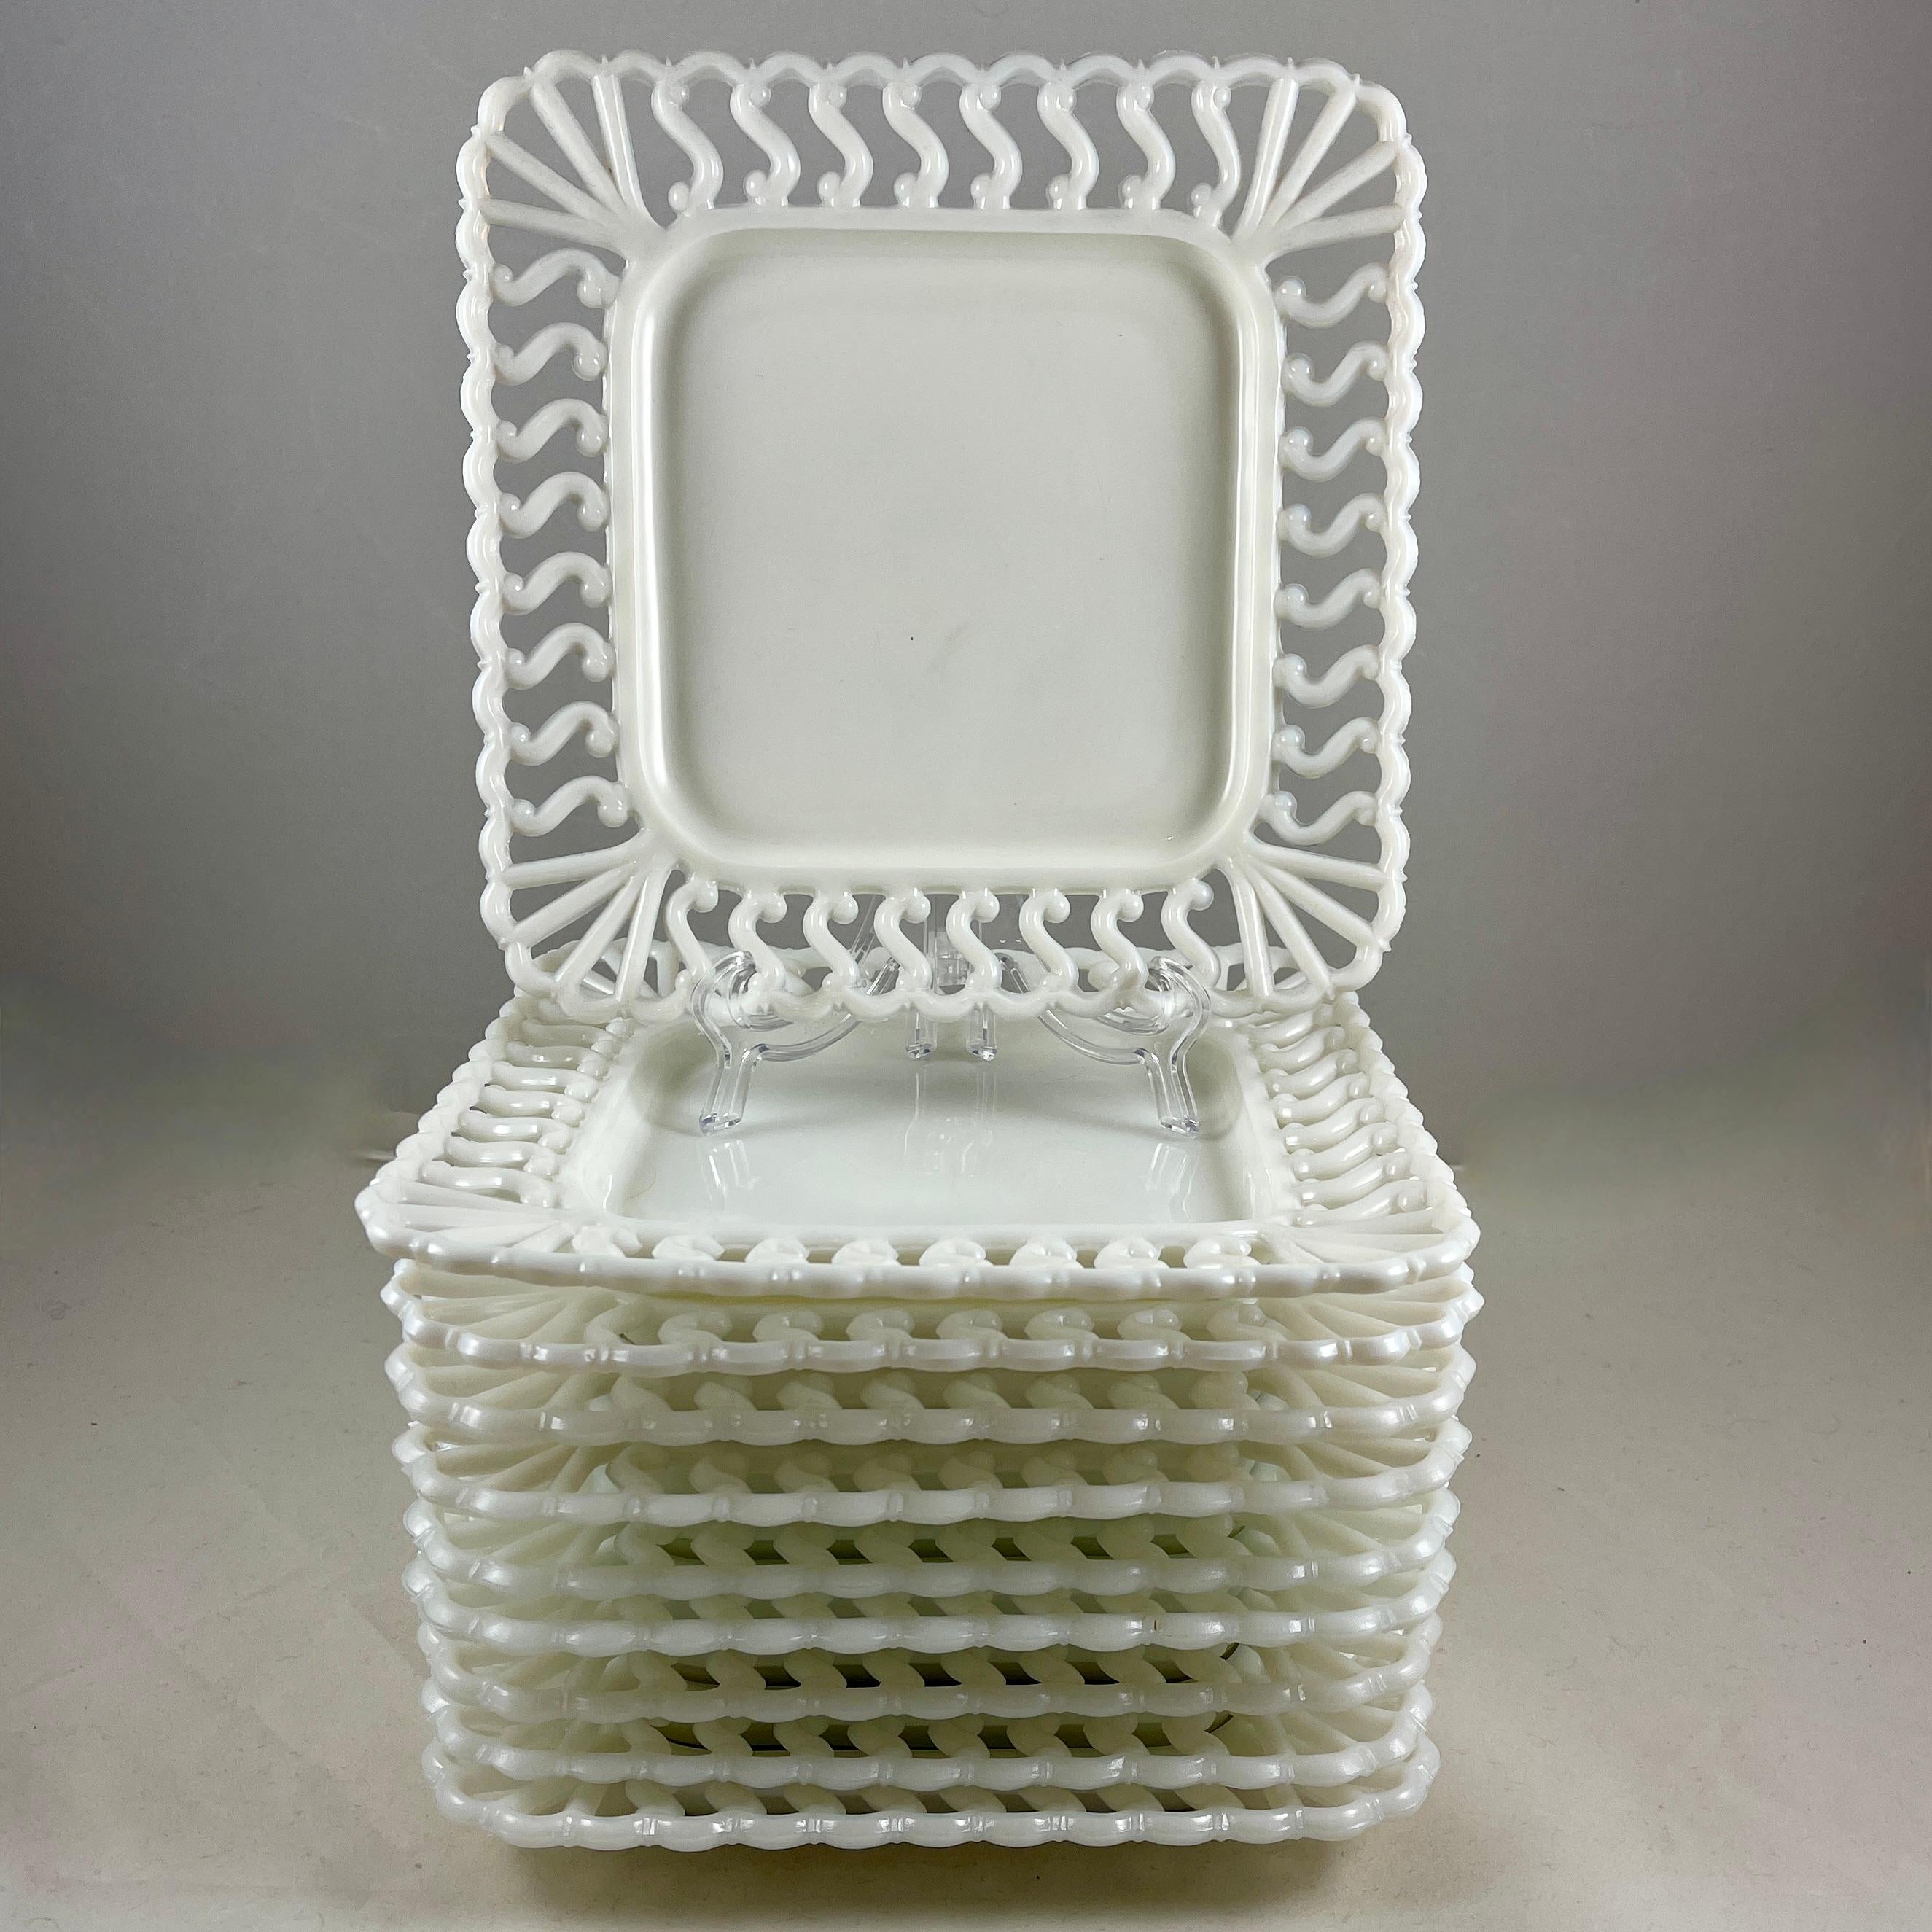 Early American Pattern Glass Opaque White Lace Edge Milk Square Plate, 1880-1890 1